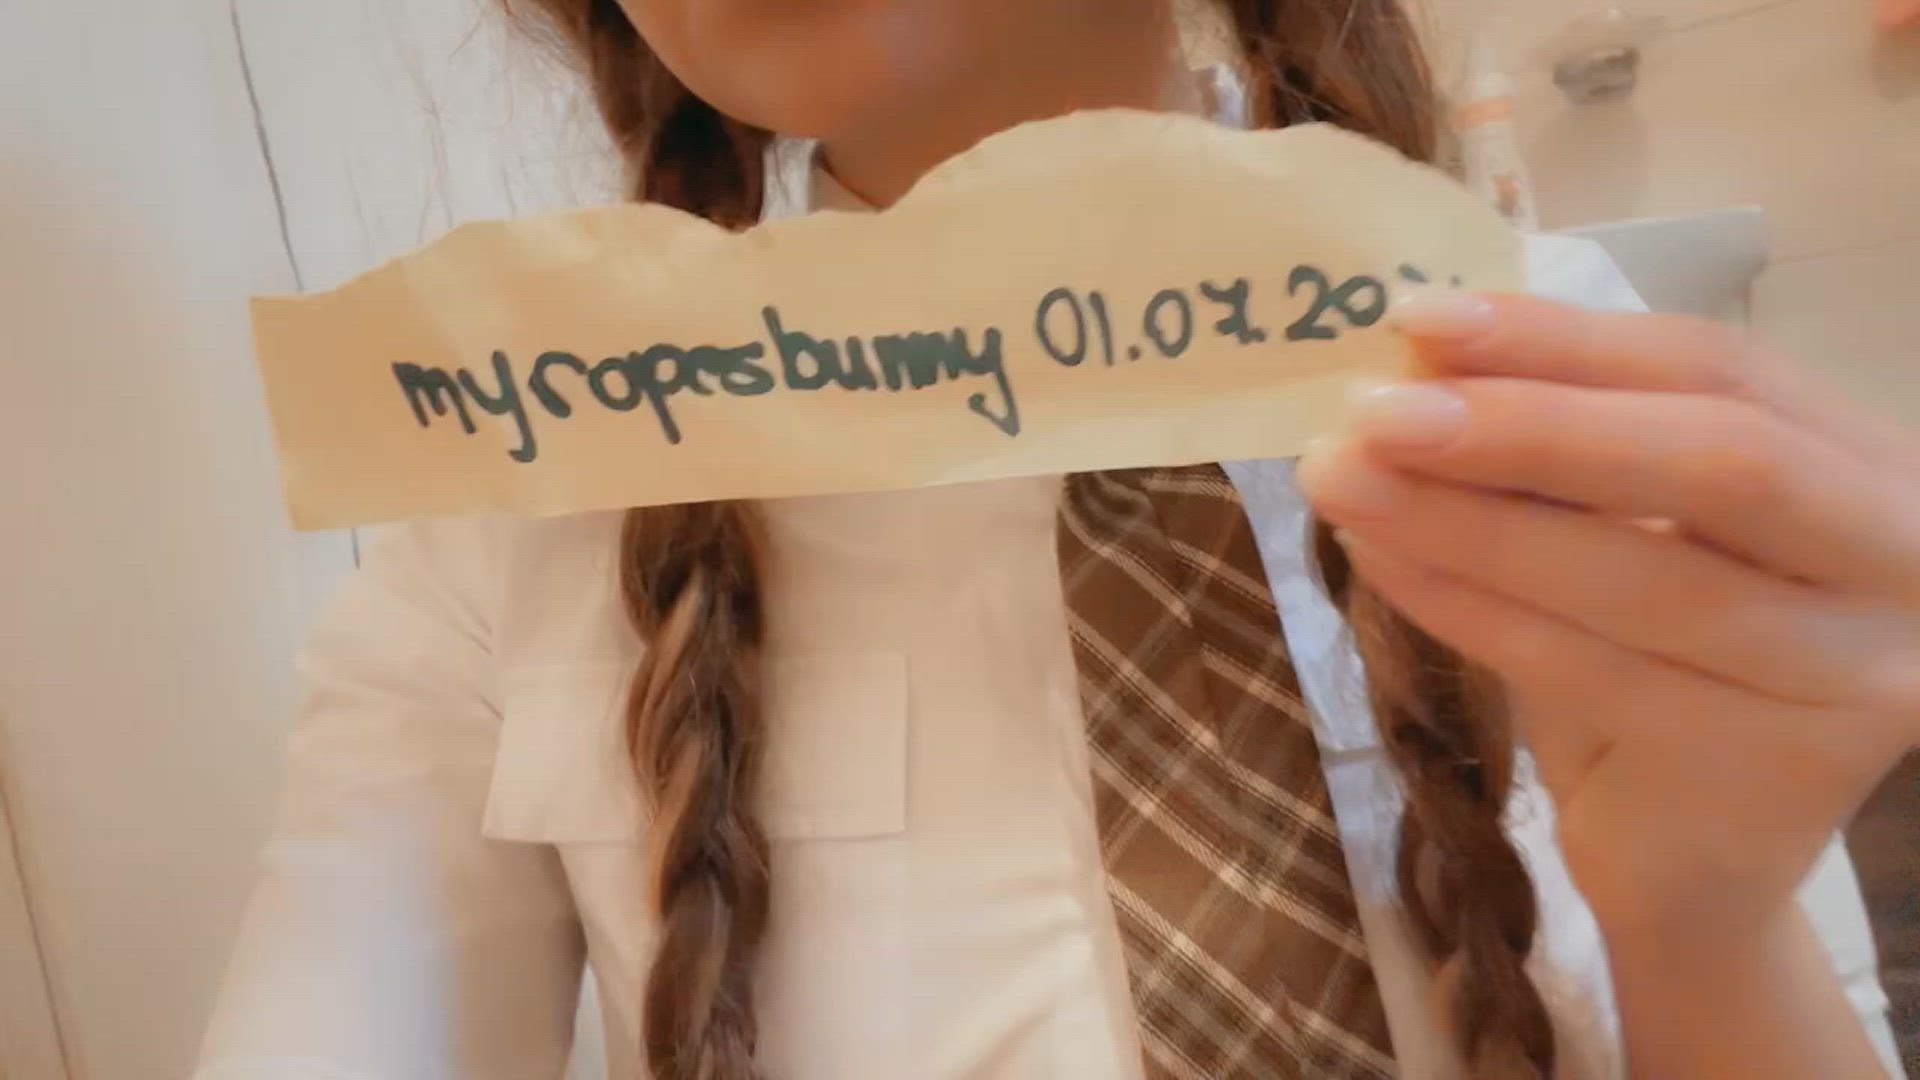 Amateur porn video with onlyfans model ropesbunny <strong>@my-ropes-bunny</strong>